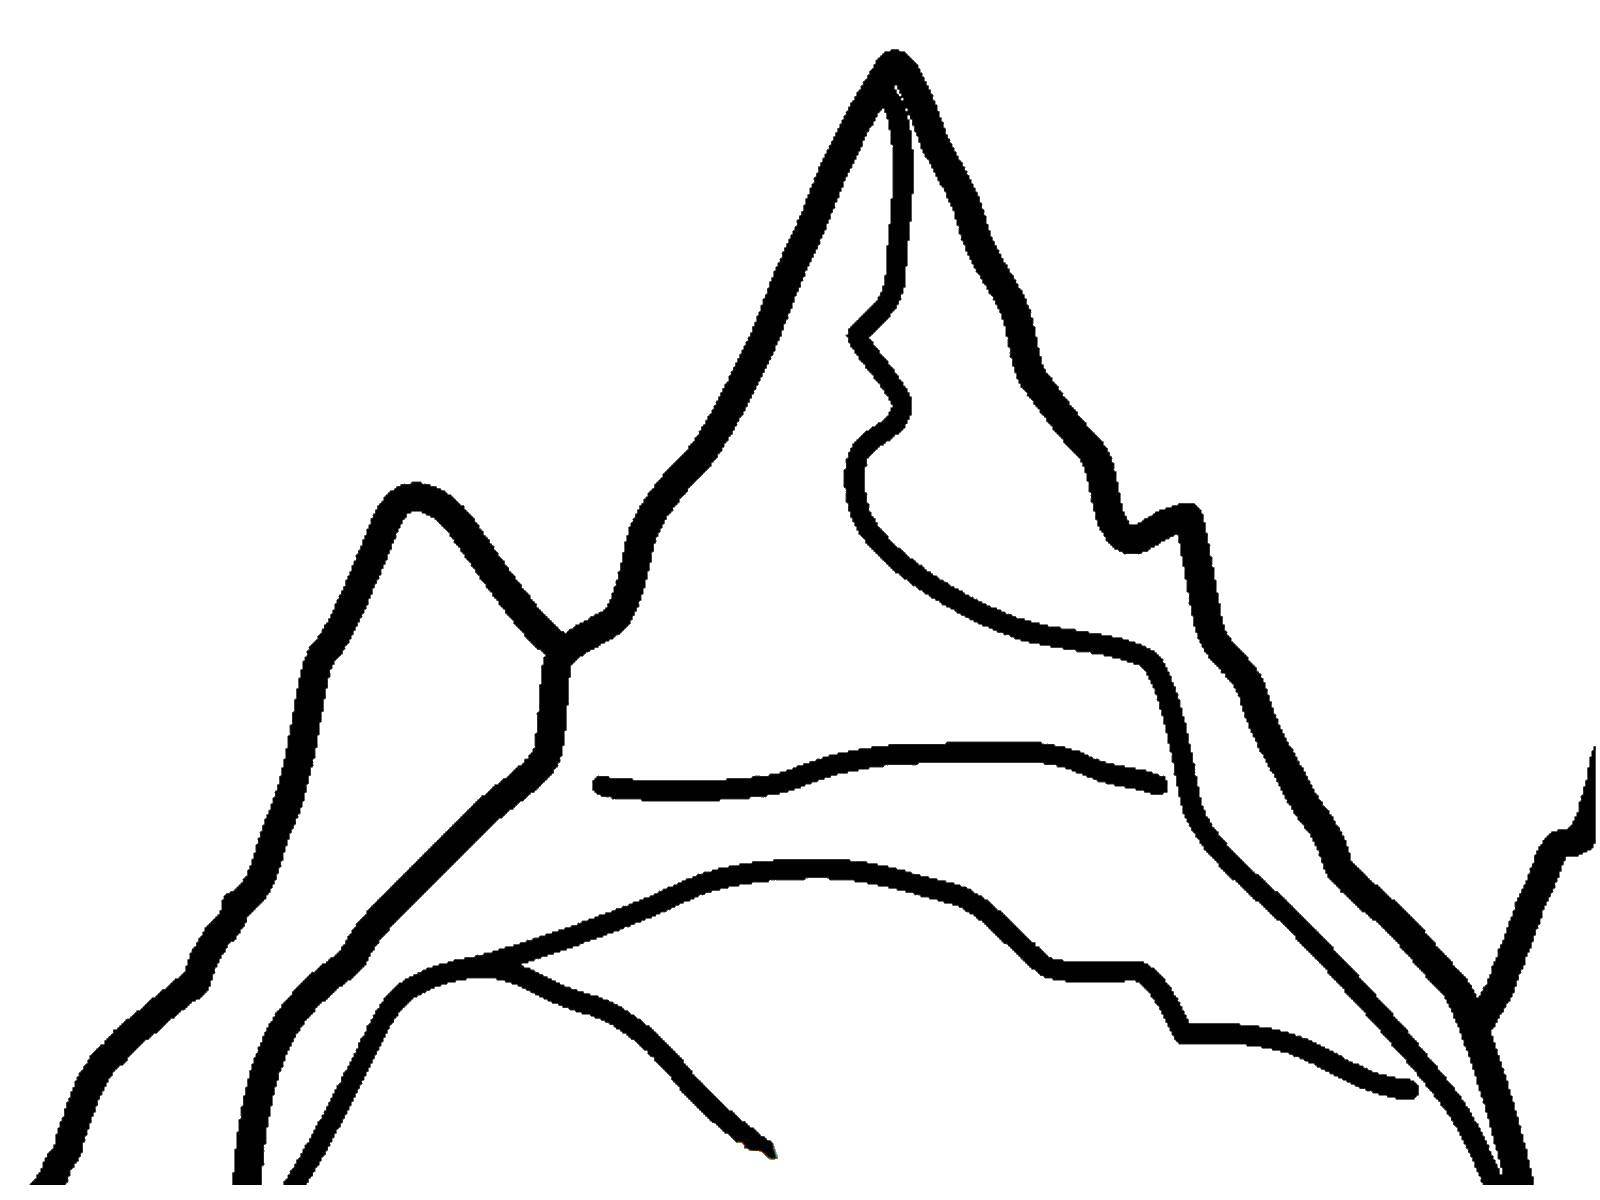 Coloring Mountain. Category Nature. Tags:  mountain.